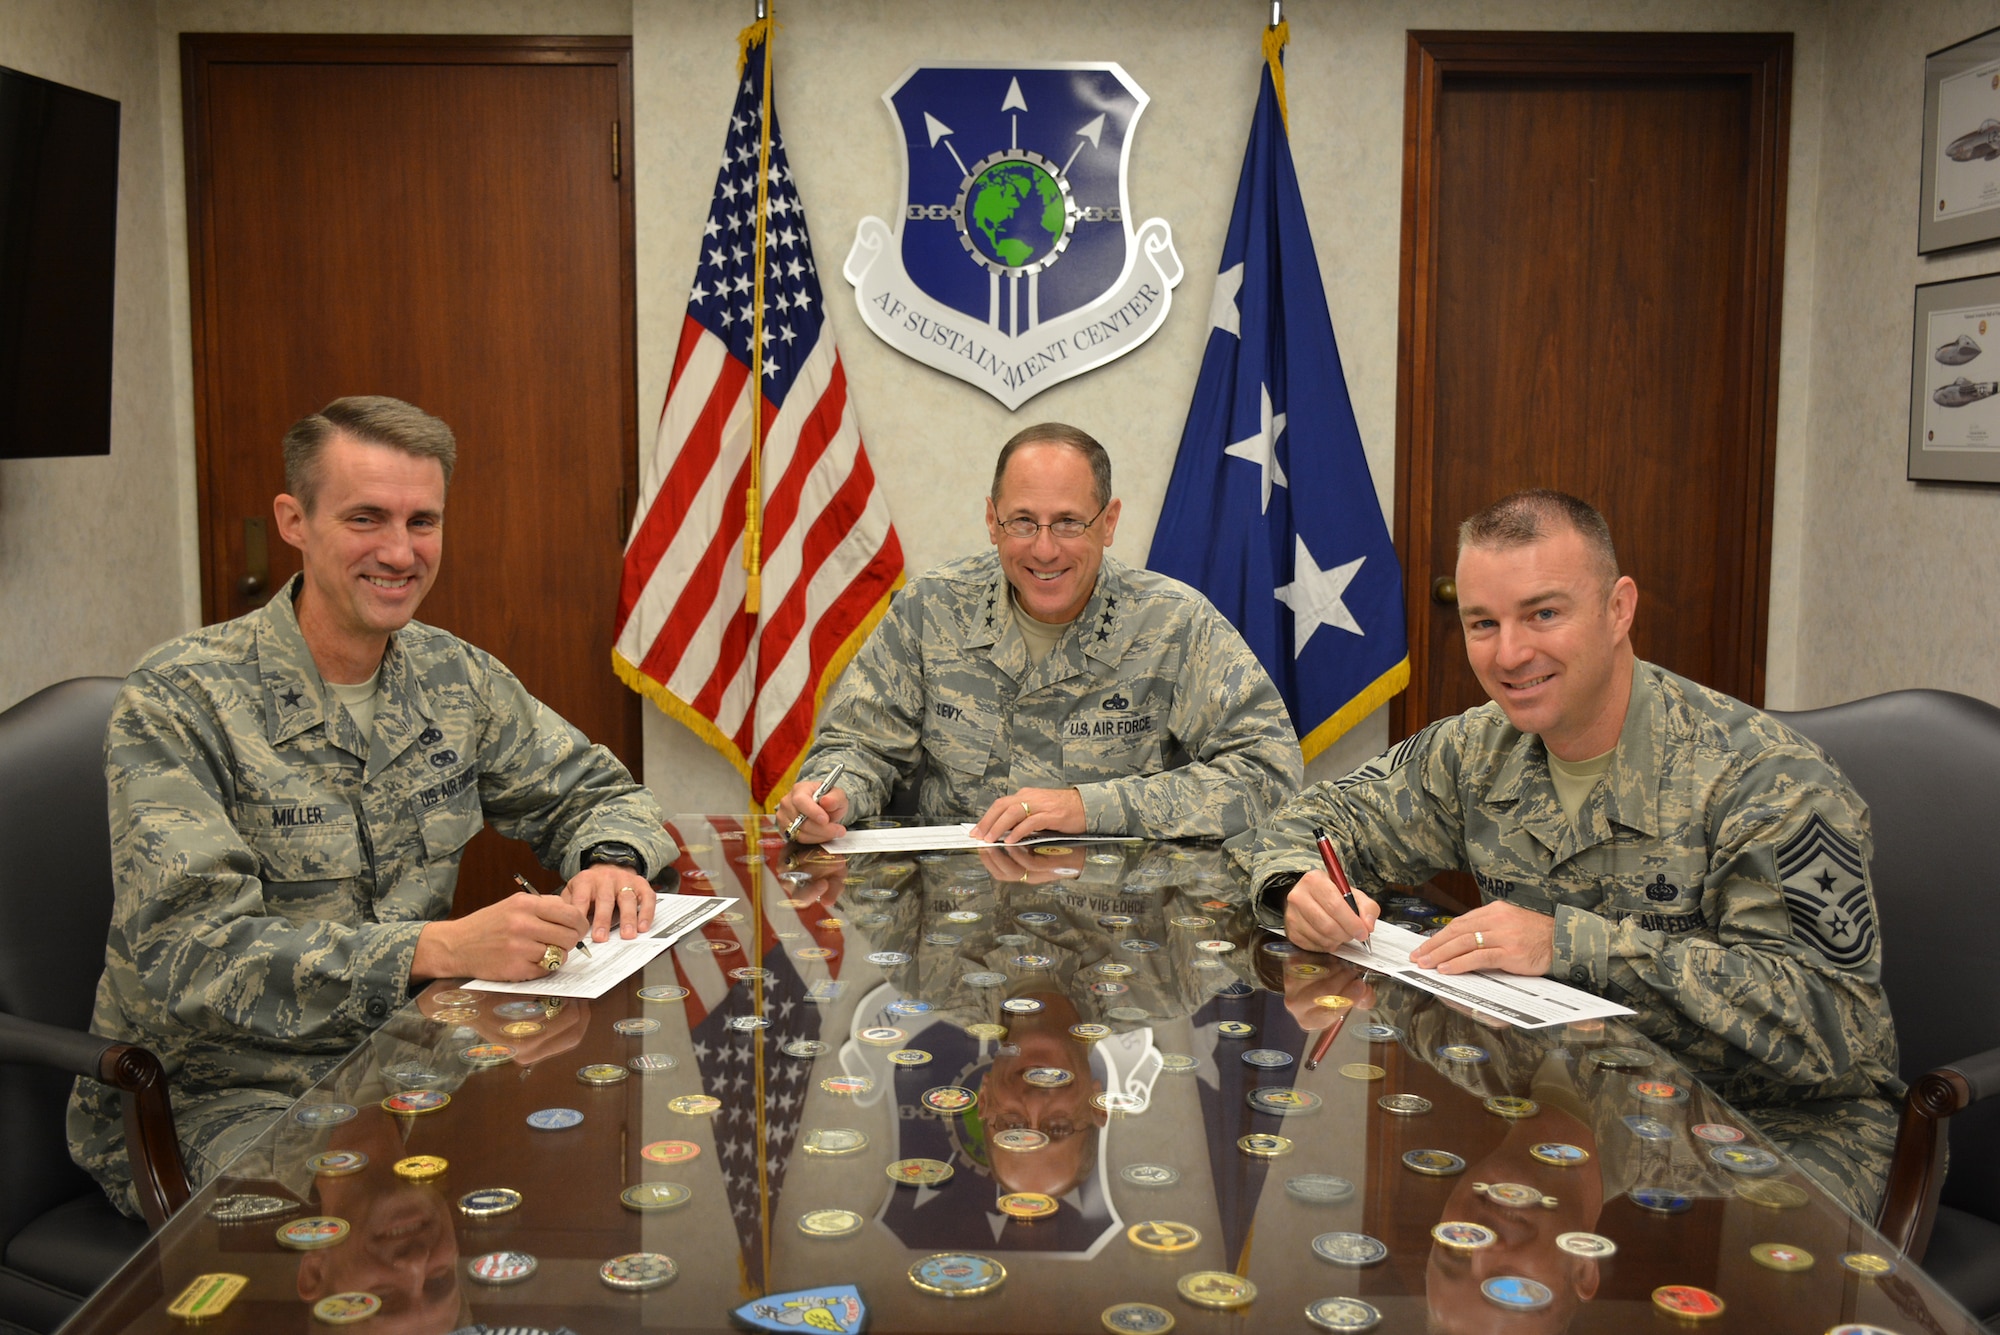 On Oct. 7, Air Force Sustainment Center senior leaders take time to fill in their pledge cards to signal the start of the Combined Federal Campaign, which began Oct. 3 and runs through Nov. 17. Filling in their pledge cards are Lt. Gen. Lee K. Levy II, AFSC commander, center, Brig. Gen. Tom Miller, AFSC vice commander, left, and AFSC Command Chief Master Sgt. Gary Sharp. The CFC is one of only two official fundraisers approved each year for Department of Defense employees. This year’s theme is “Camp CFC – Let the CAMPaign Begin.” (Photo by Darren D. Heusel)